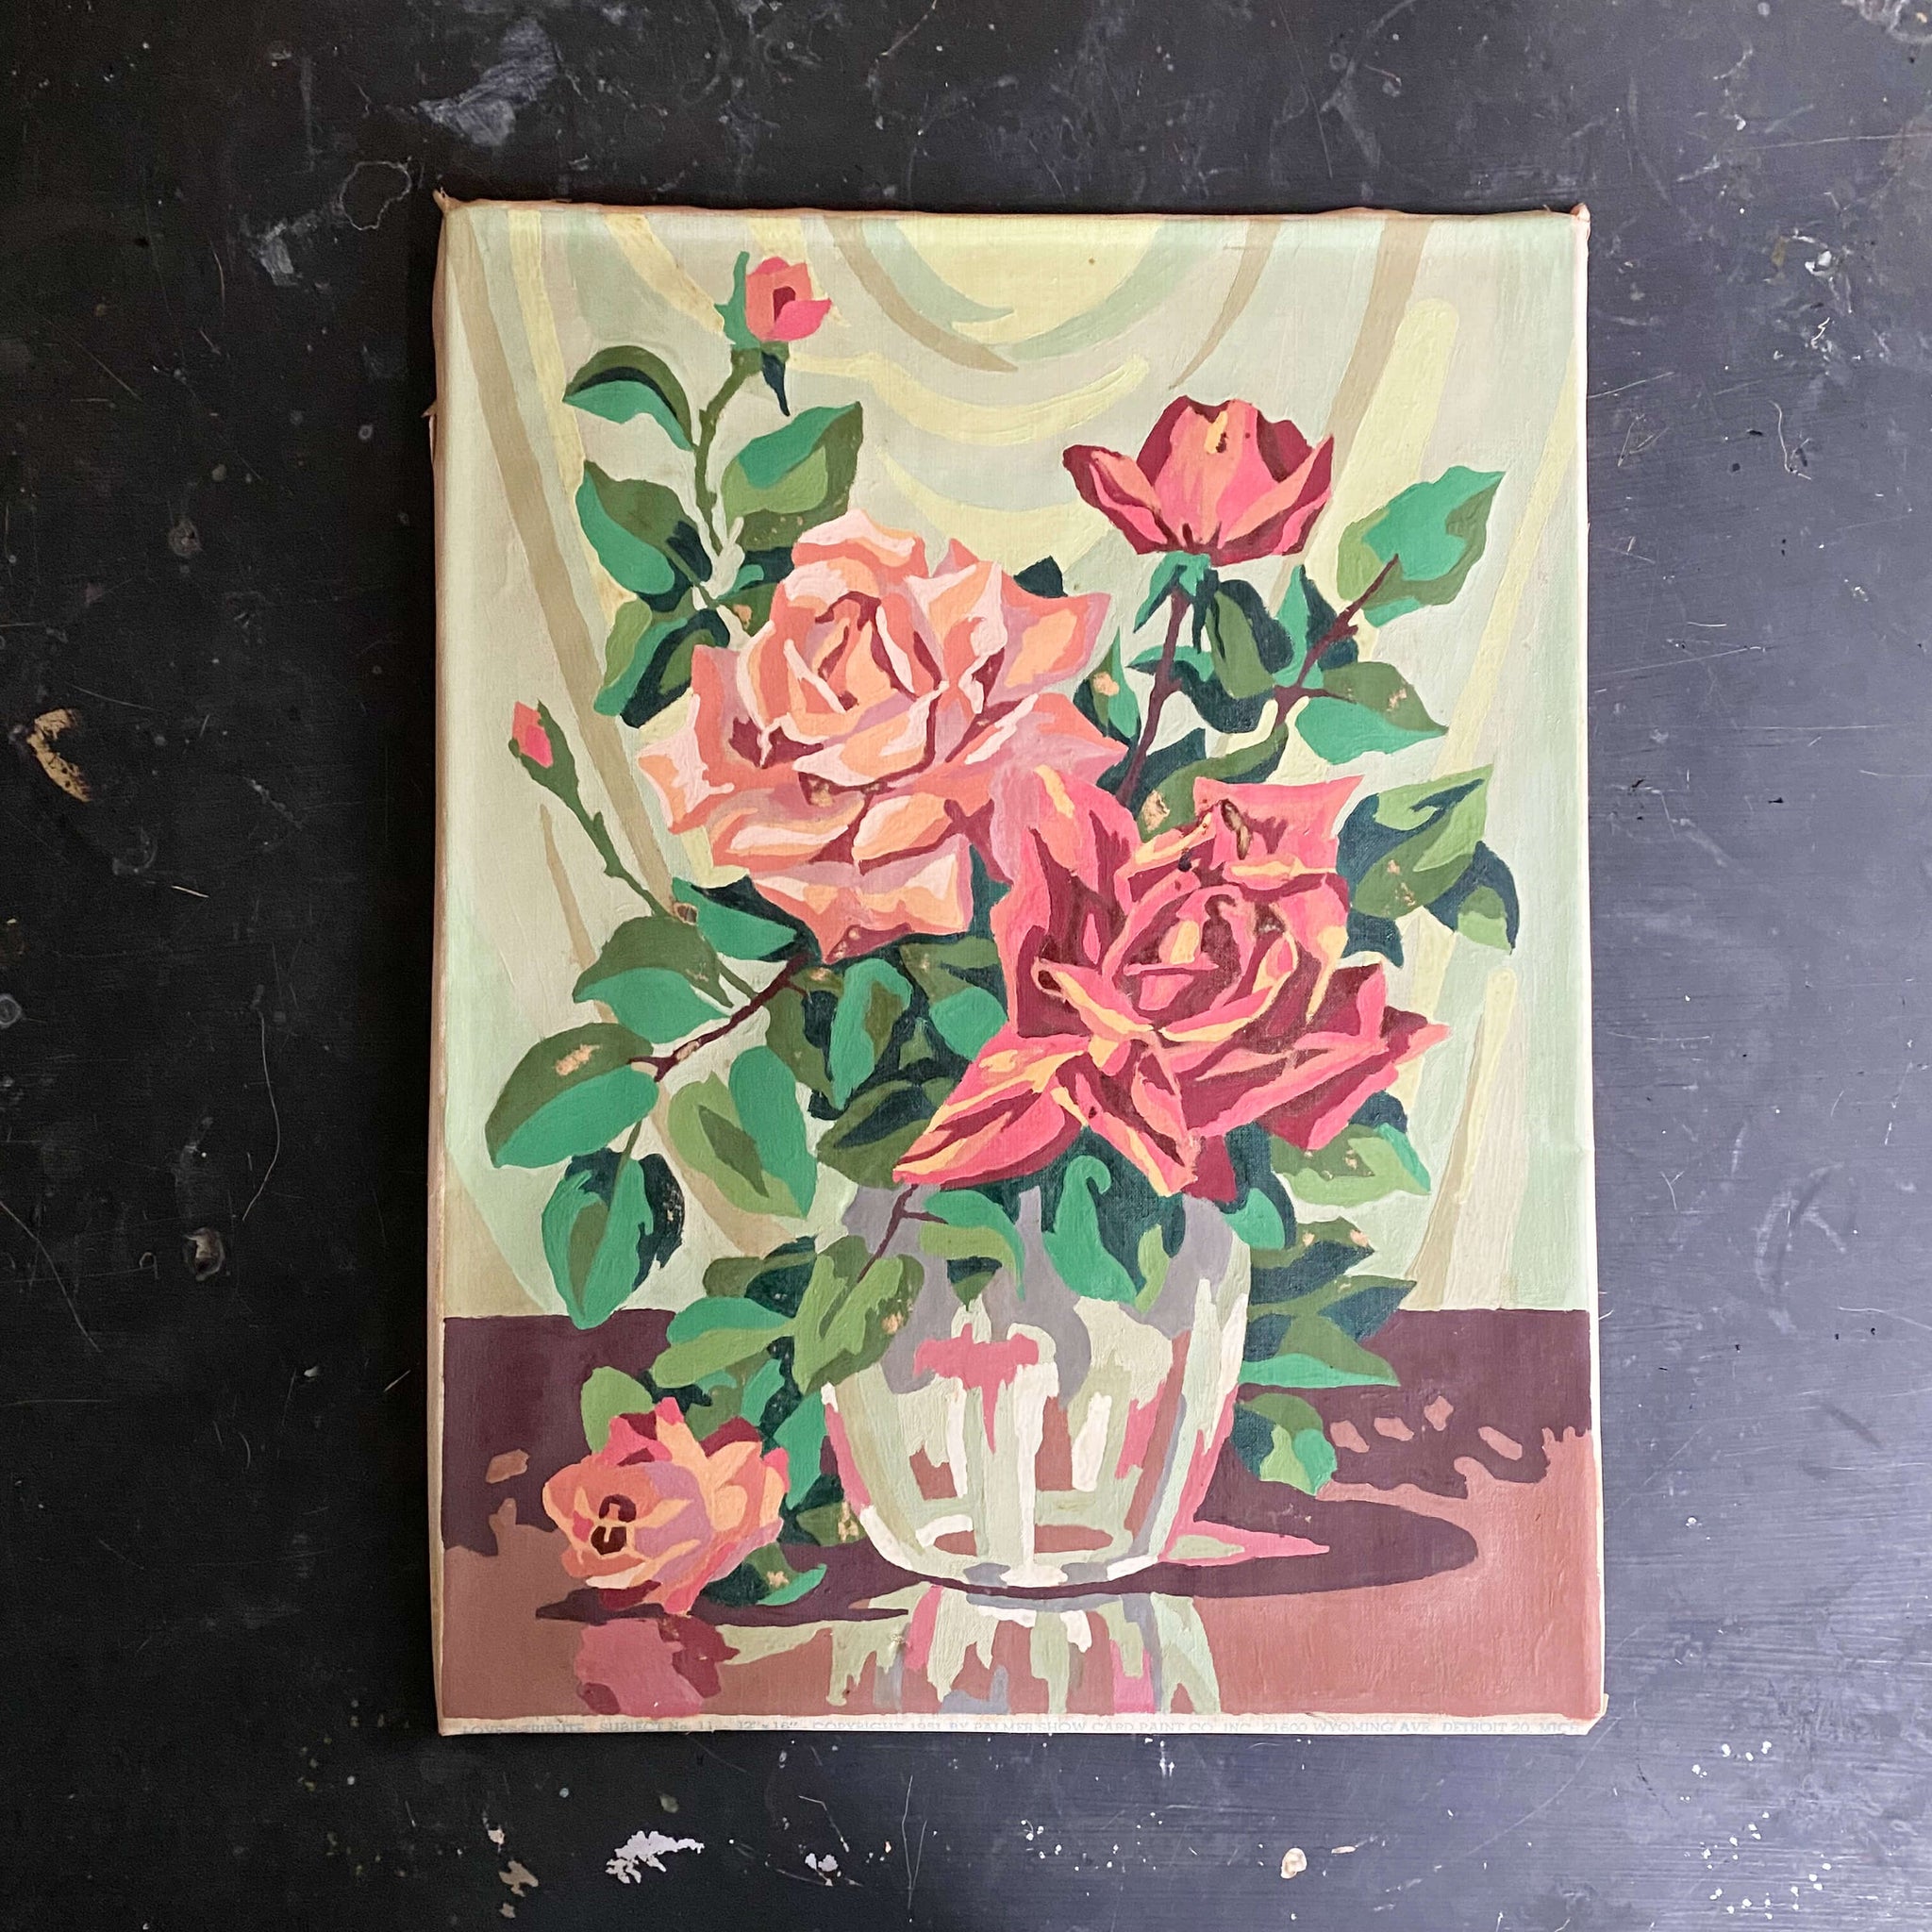 Vintage 1950s Rolled Canvas Paint By Number - Pink Rose Bouquet - Love's Tribute - Palmer Show Card Paint Co circa 1951